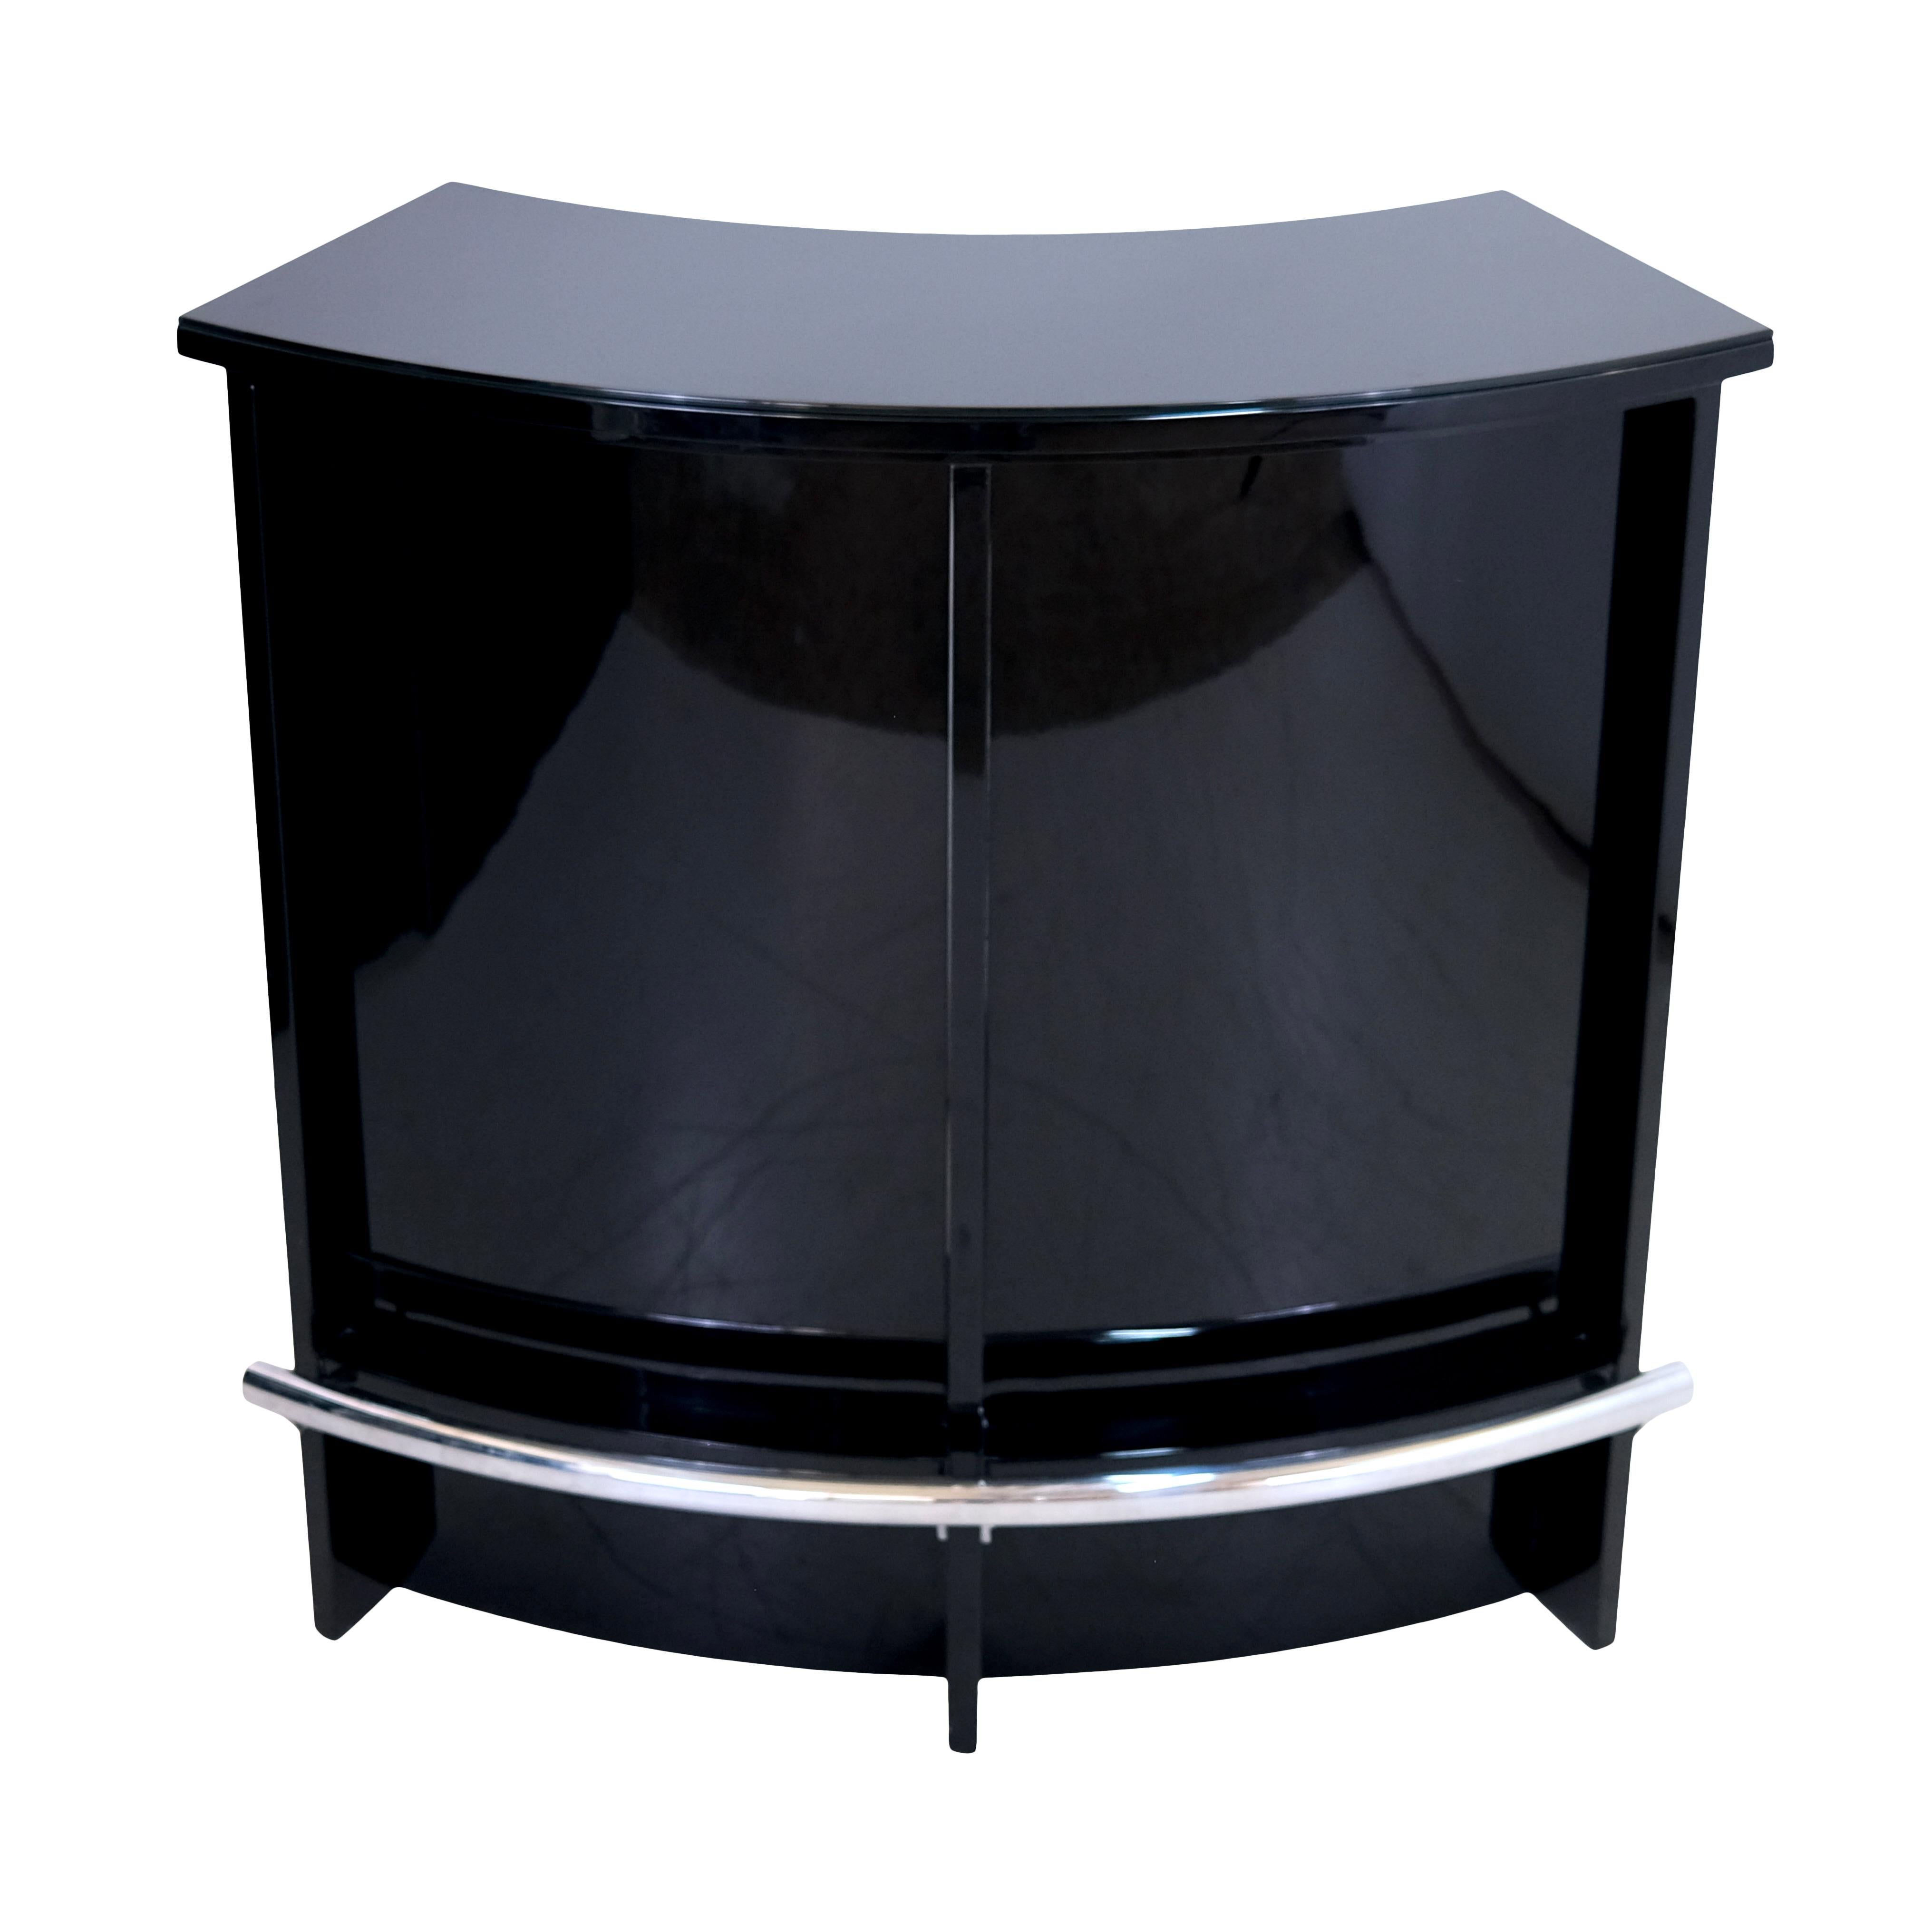 Semicircular bar counter in black lacquer

Bar counter
High gloss black piano lacquer
Nickel plated railing

Original Art Deco, France 1930s

Dimensions:
Width: 100 cm
Height: 104 cm
Depth: 40 cm
Working depth: 30 cm